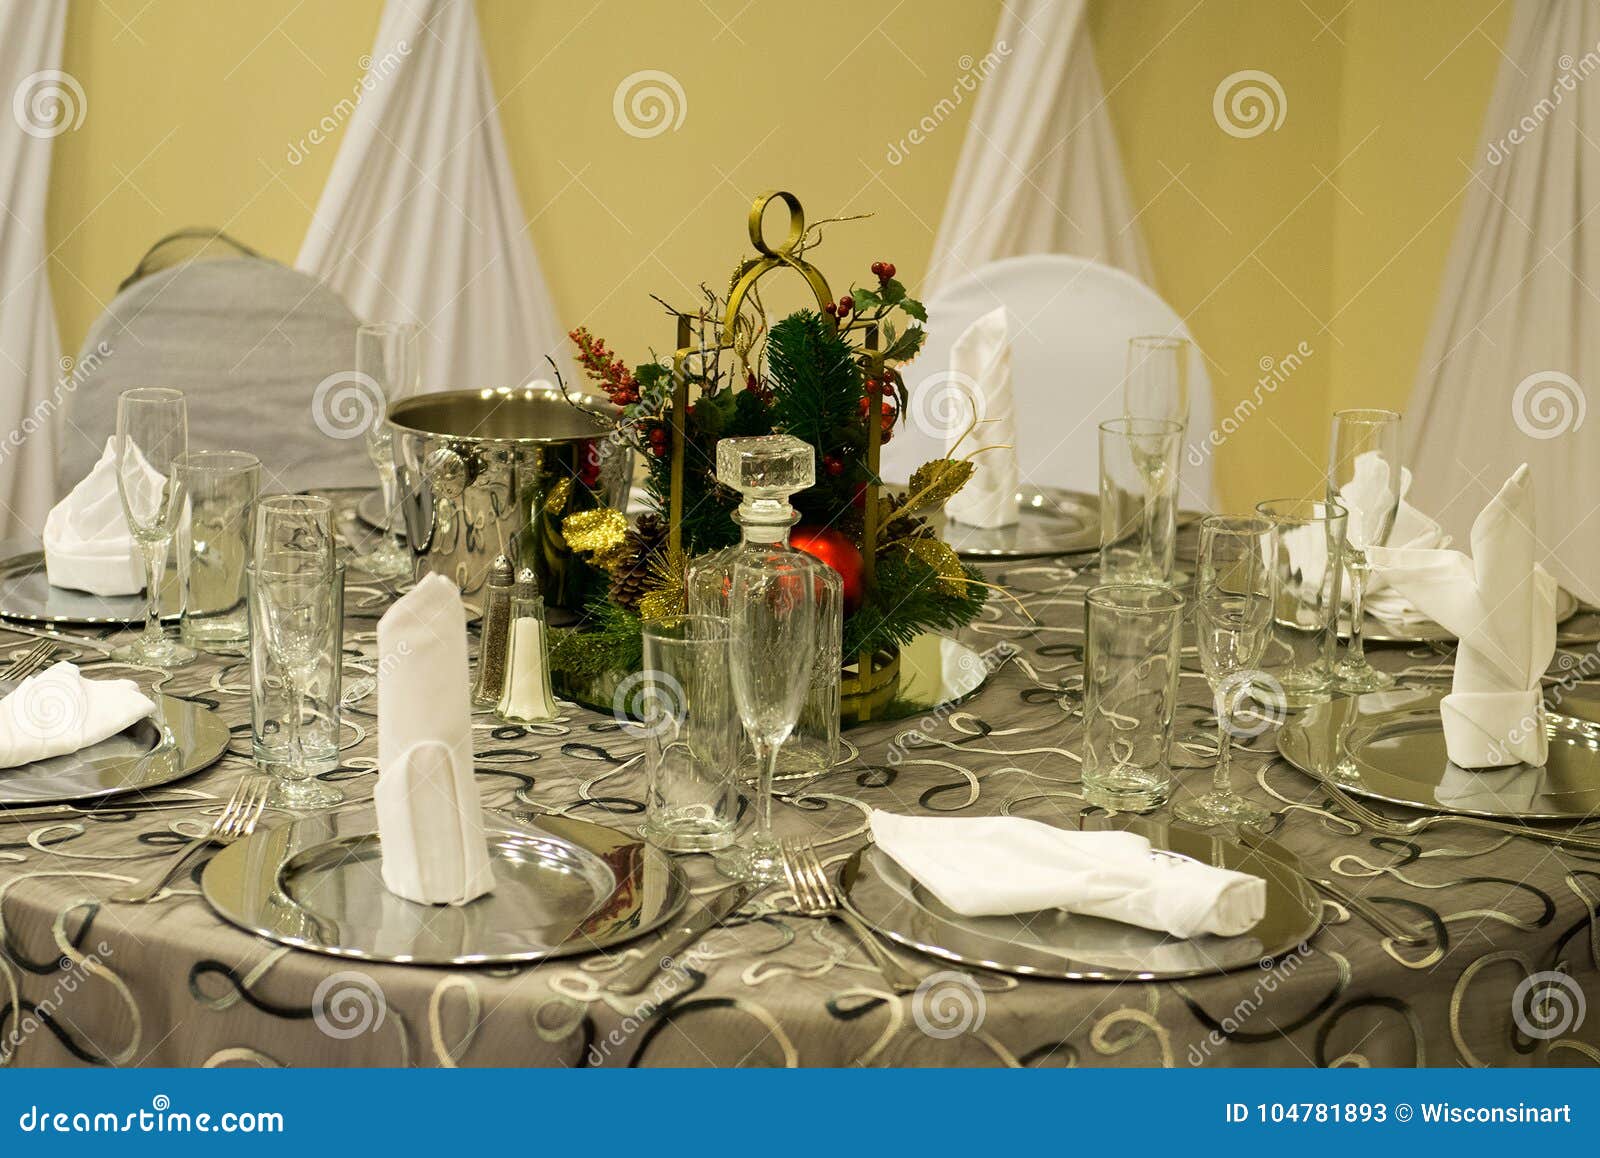 wedding place setting, cater, catering